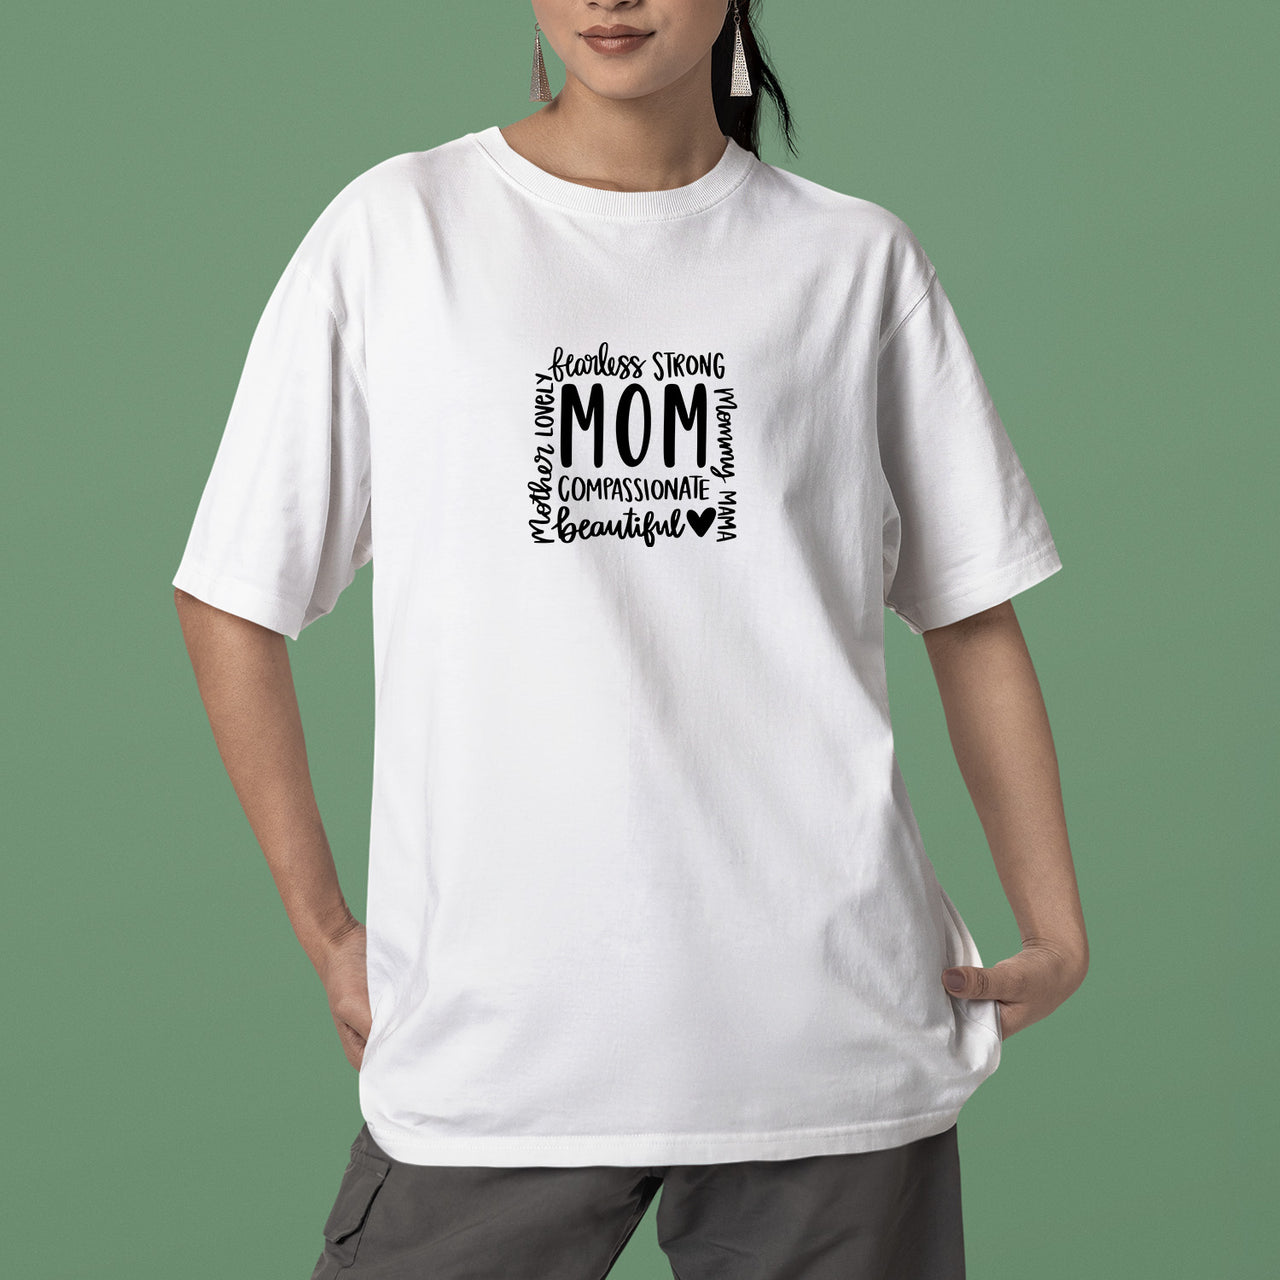 Mom Phrase Collage T-Shirt, Mom Life, Blessed Mama, Loved Mom Tee, Mama Shirt, Mom Shirt, Mother's Day Gift, Happy Mother’s Day